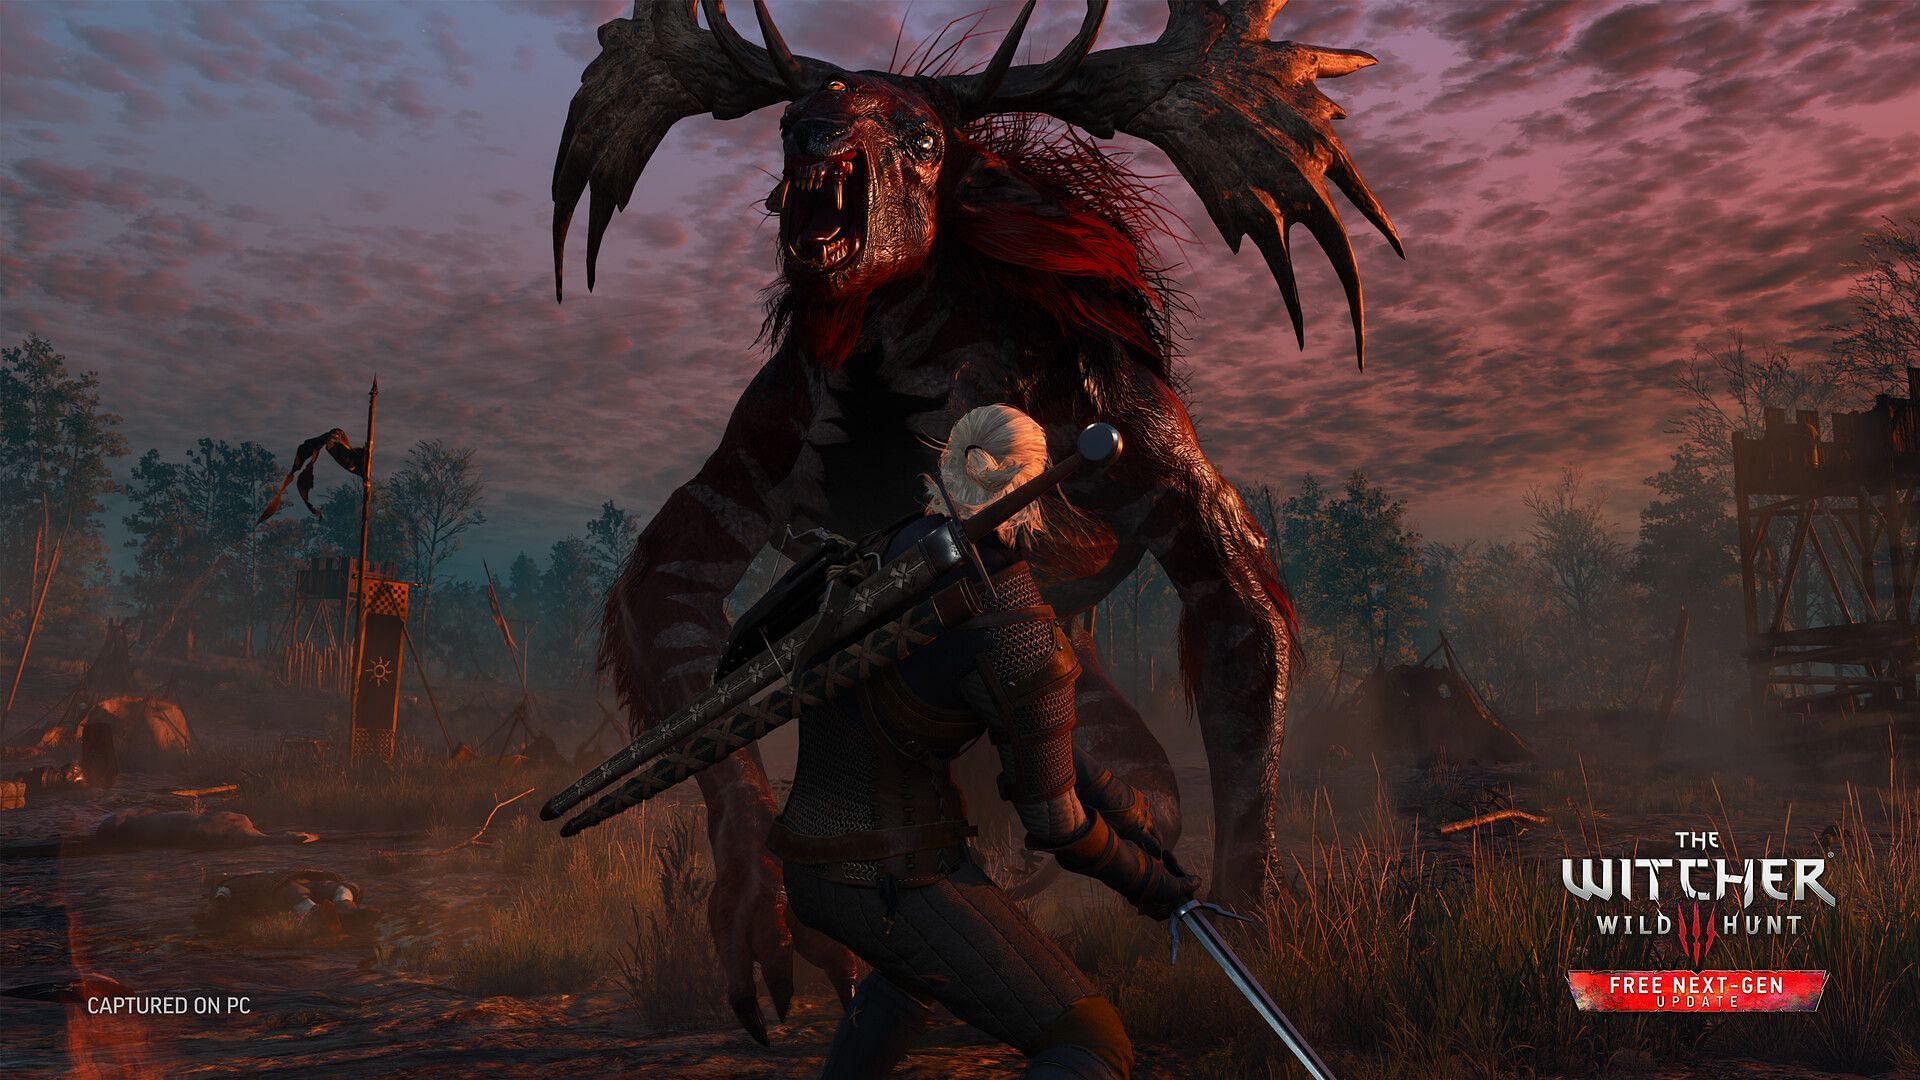 The best RPG deals in the Steam Spring Sale: The Witcher 3 (Image via CDPR)